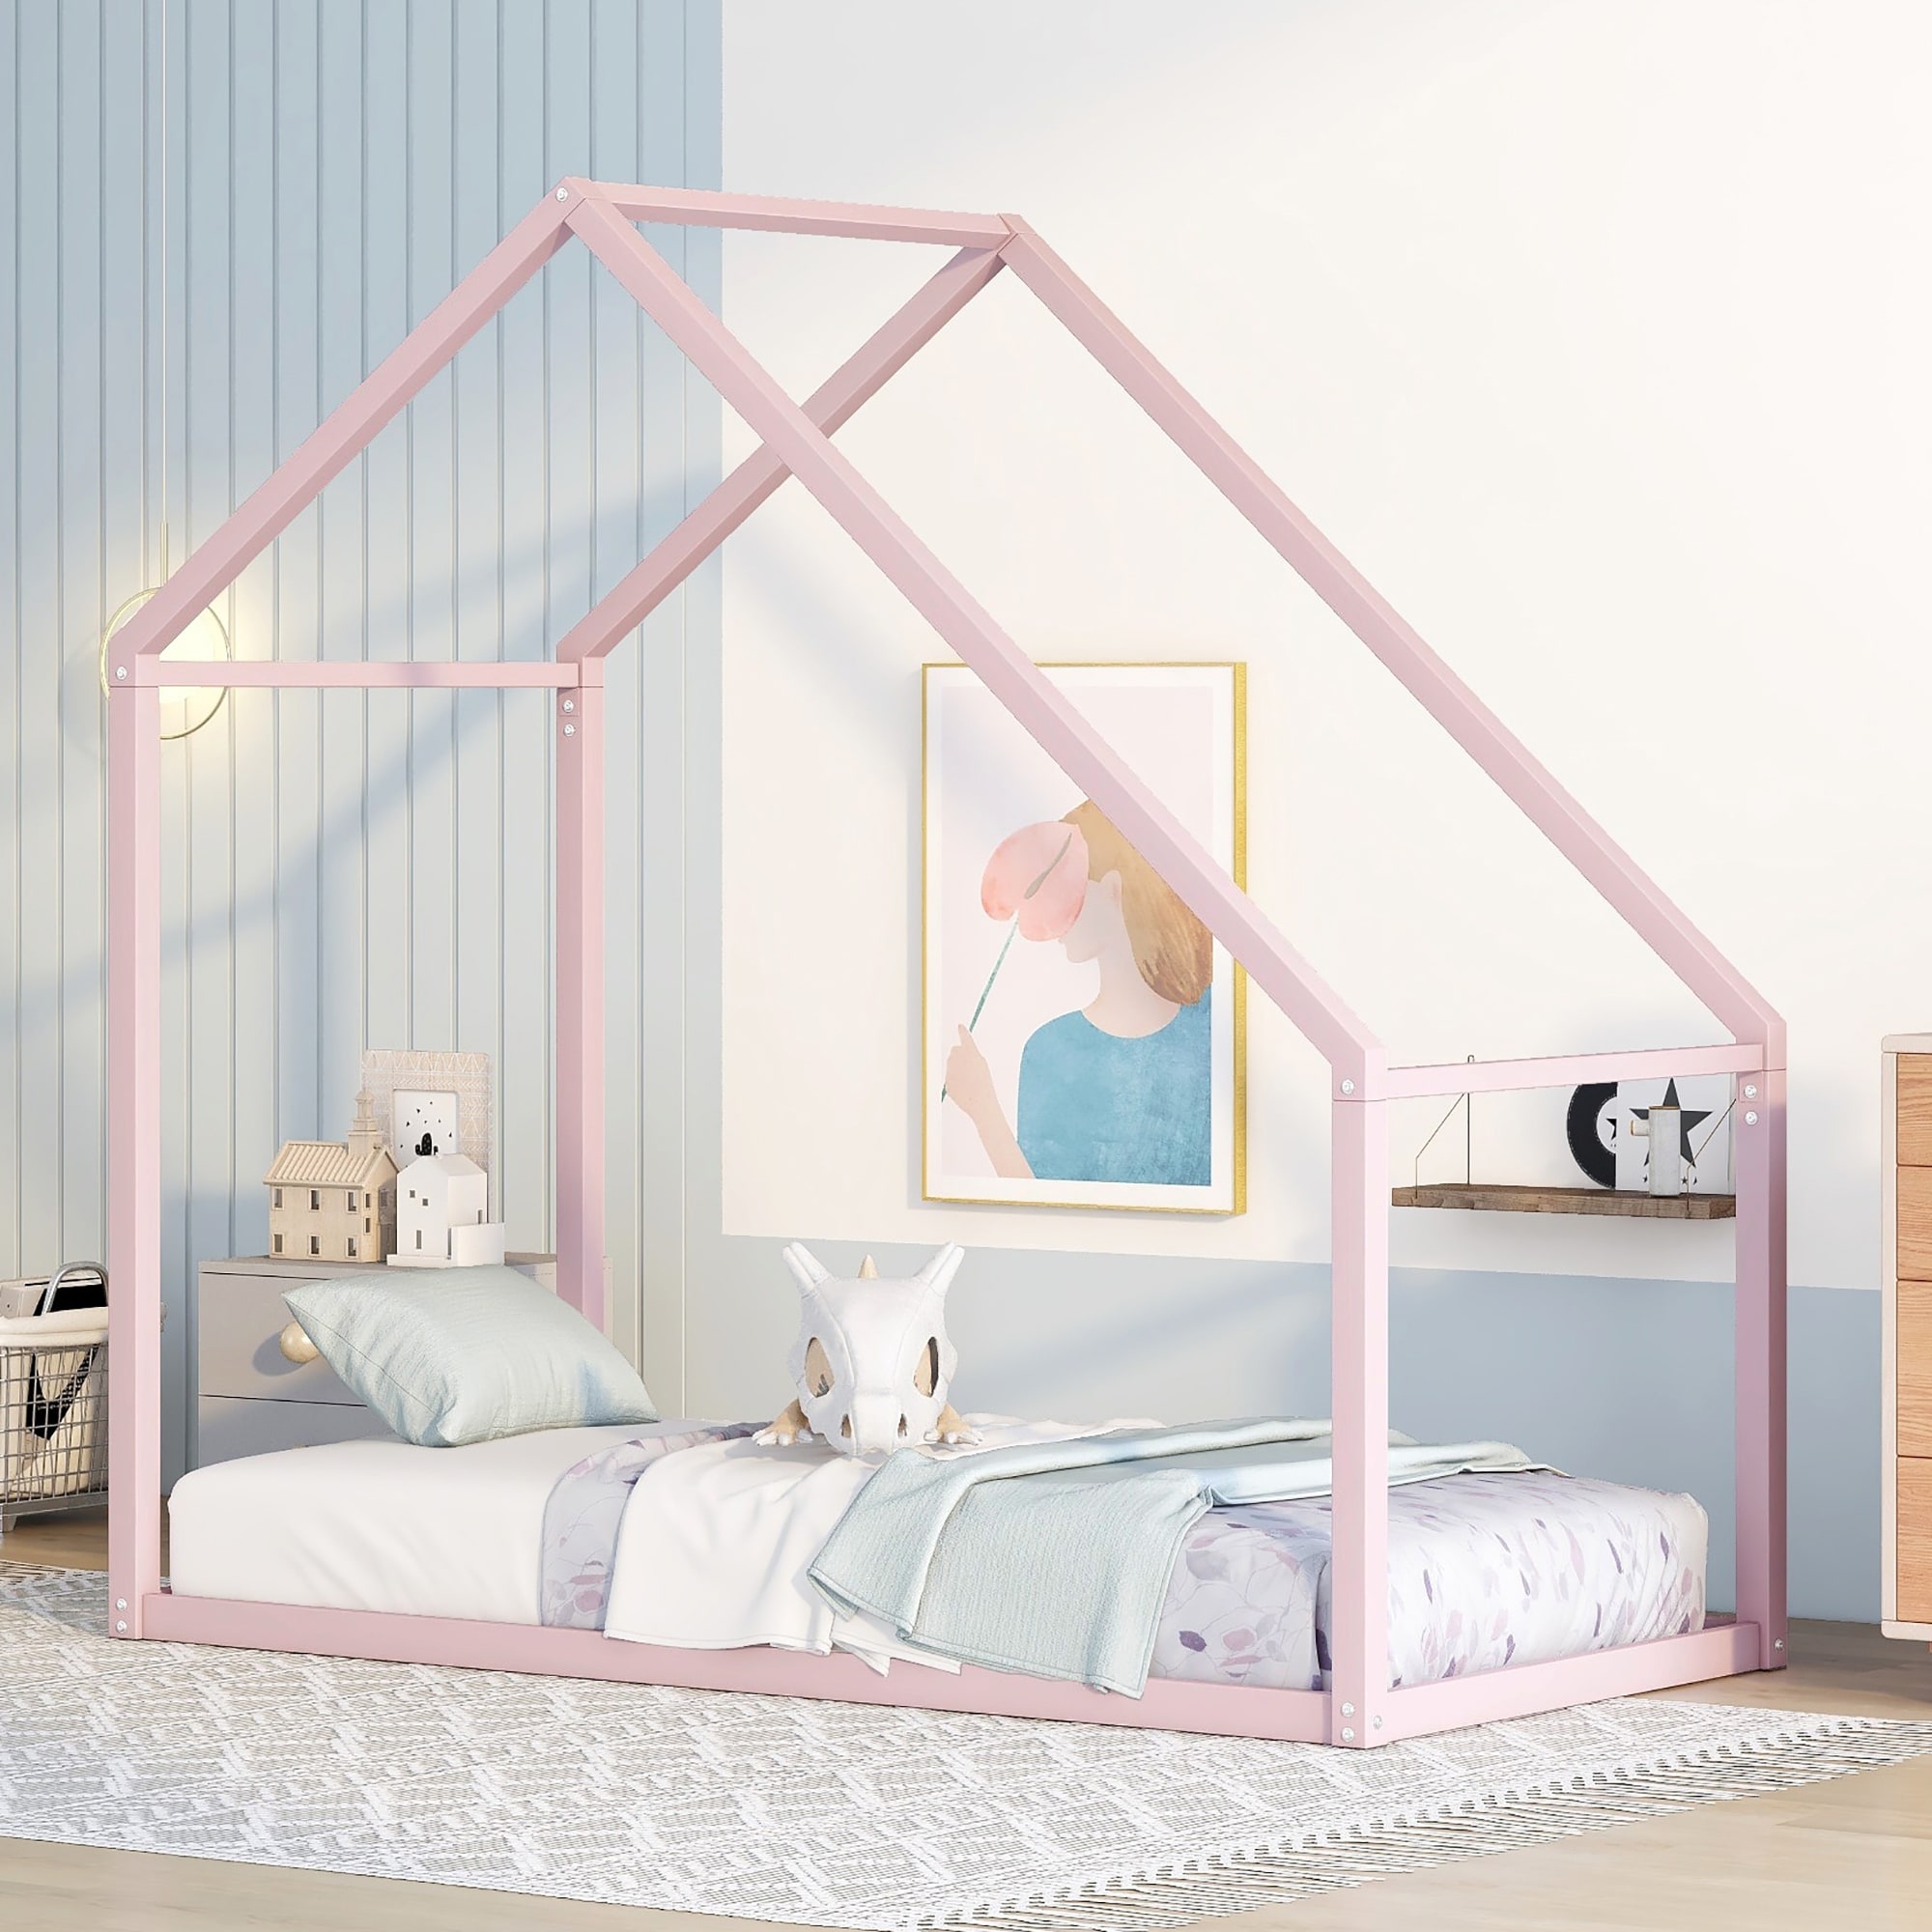 Twin Size House Platform Beds, Two Shared Beds, Metal Bed Frame with Roof,  Montessori Bed Floor Bed for Kids Teens - Bed Bath & Beyond - 38978803